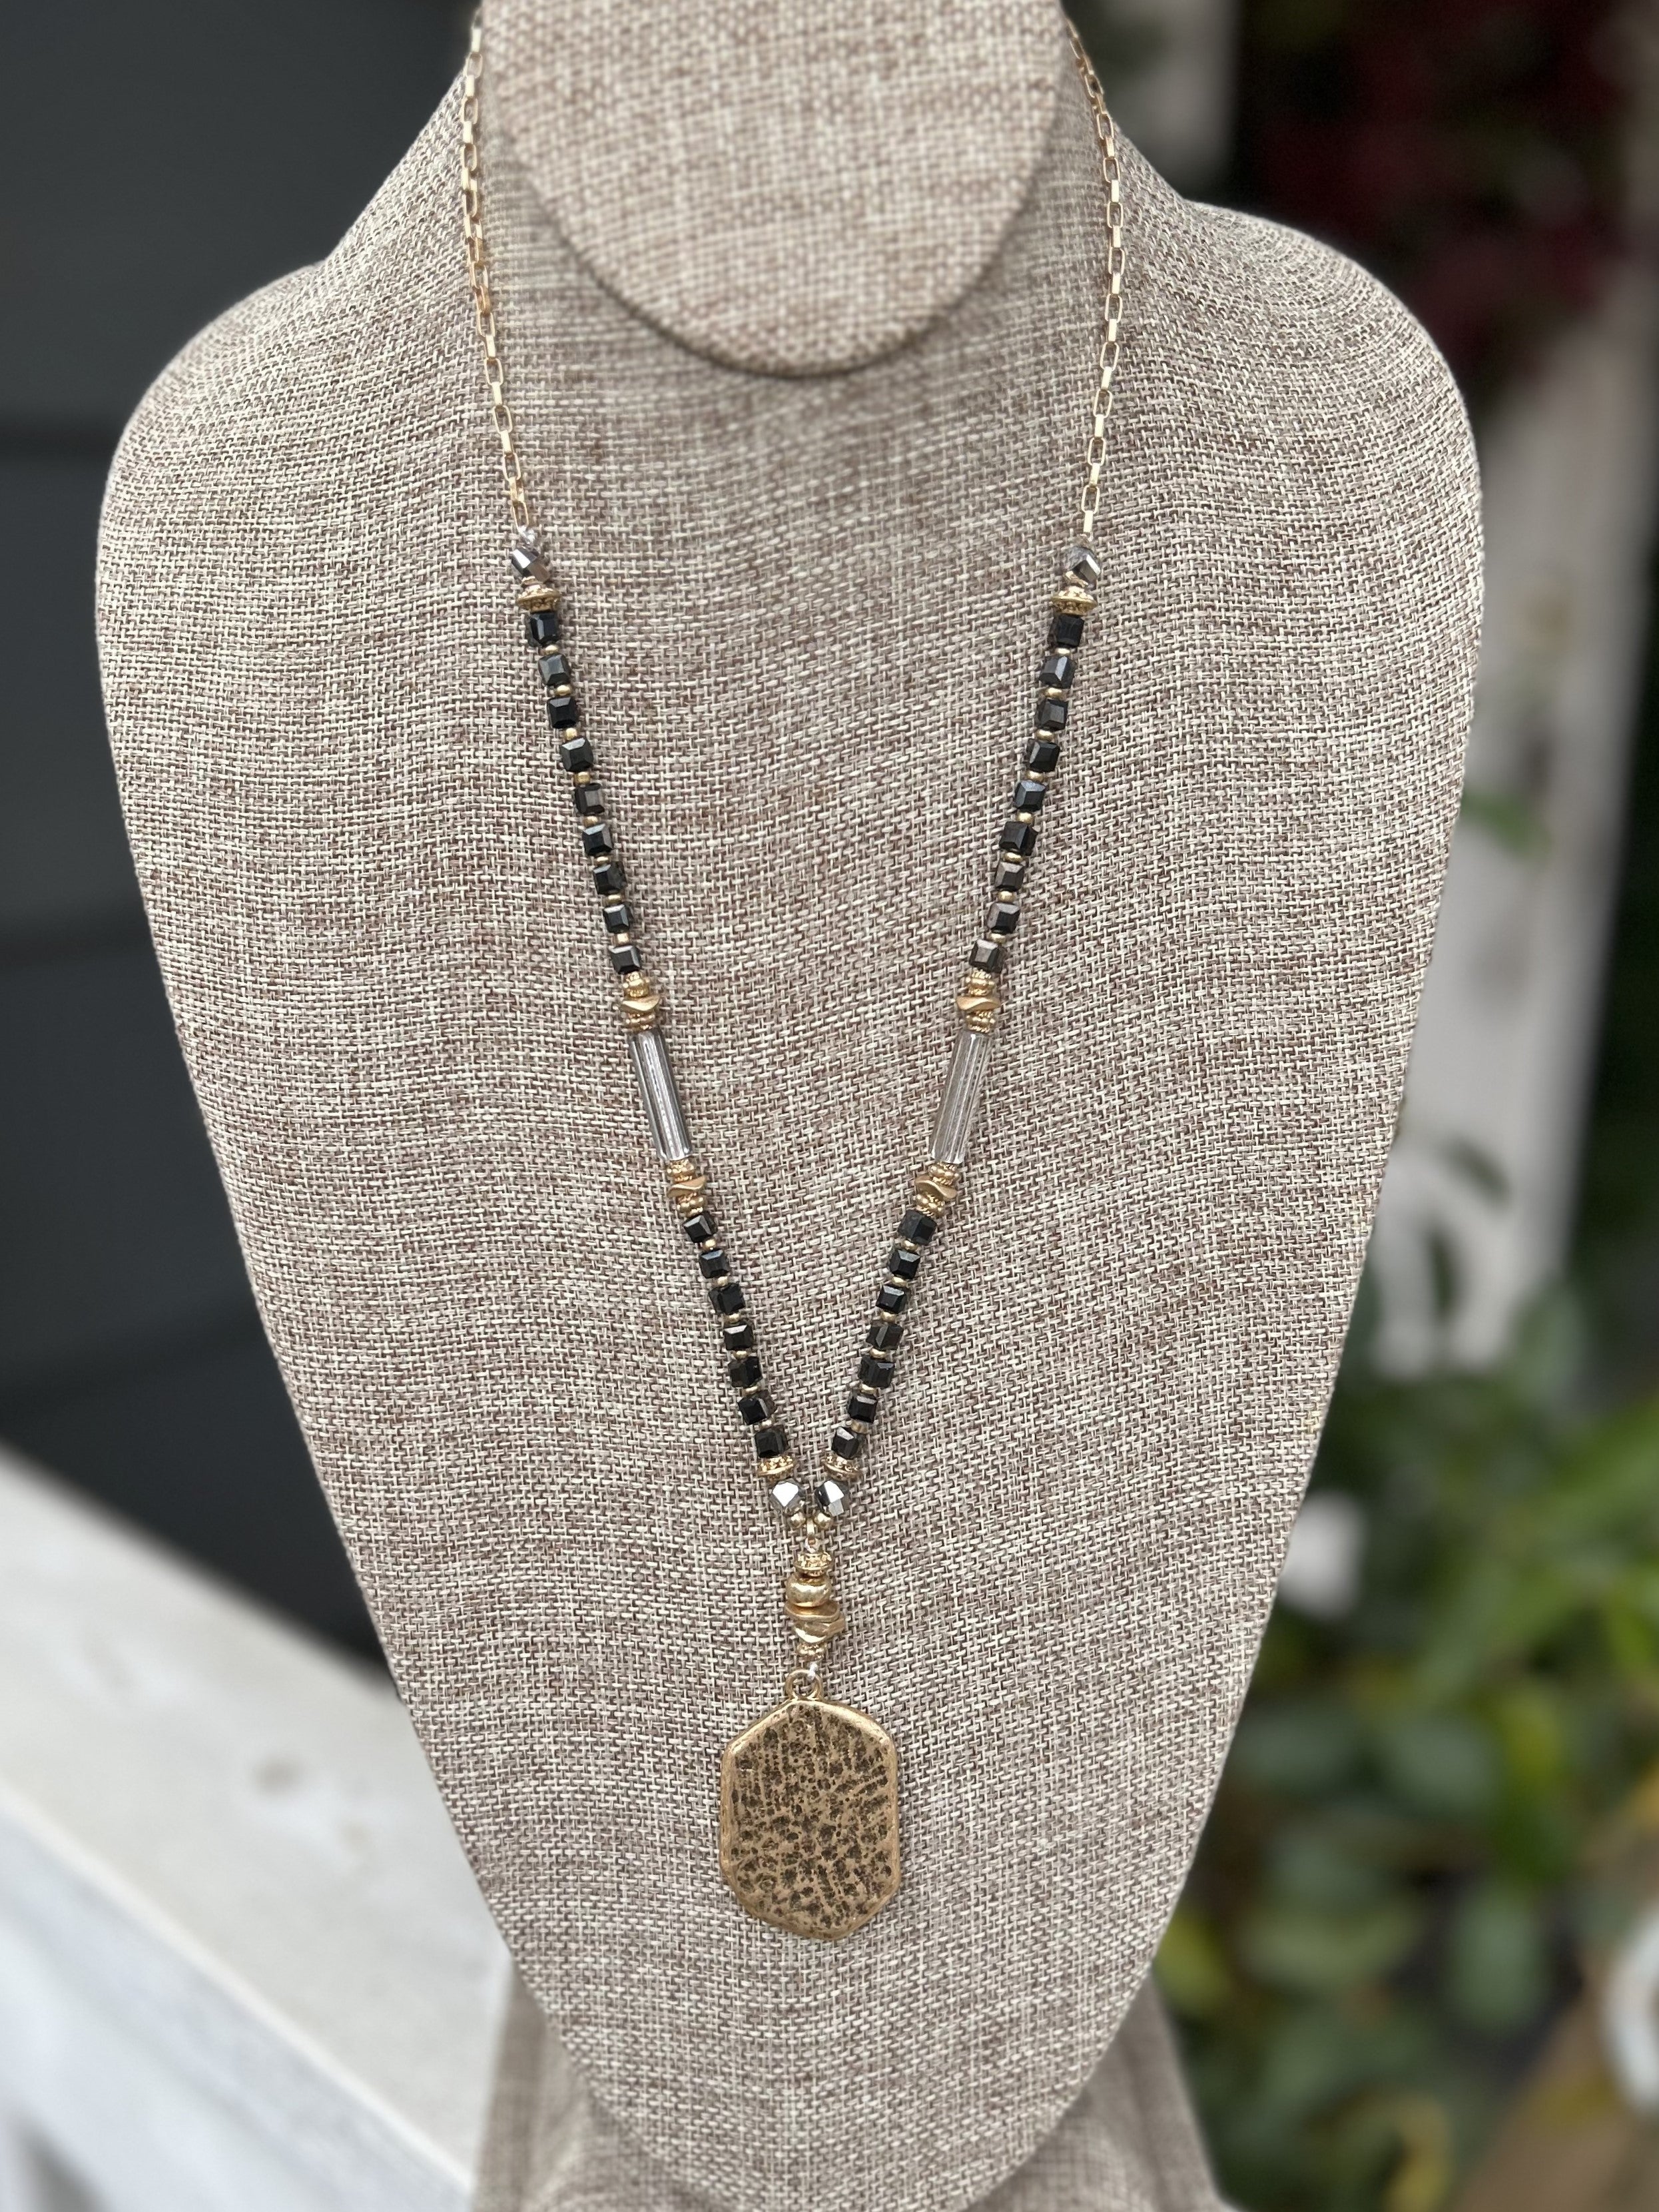 Take your look to the next level with this elegant Black & Gold Long Necklace. Crafted with a unique chain composed of differing shapes, it's finished off with a statement hammered gold drop that offers a perfect bit of sparkle. A classic combination of black, gold and clear, this necklace will turn heads.   Approximate Length: 30-32"